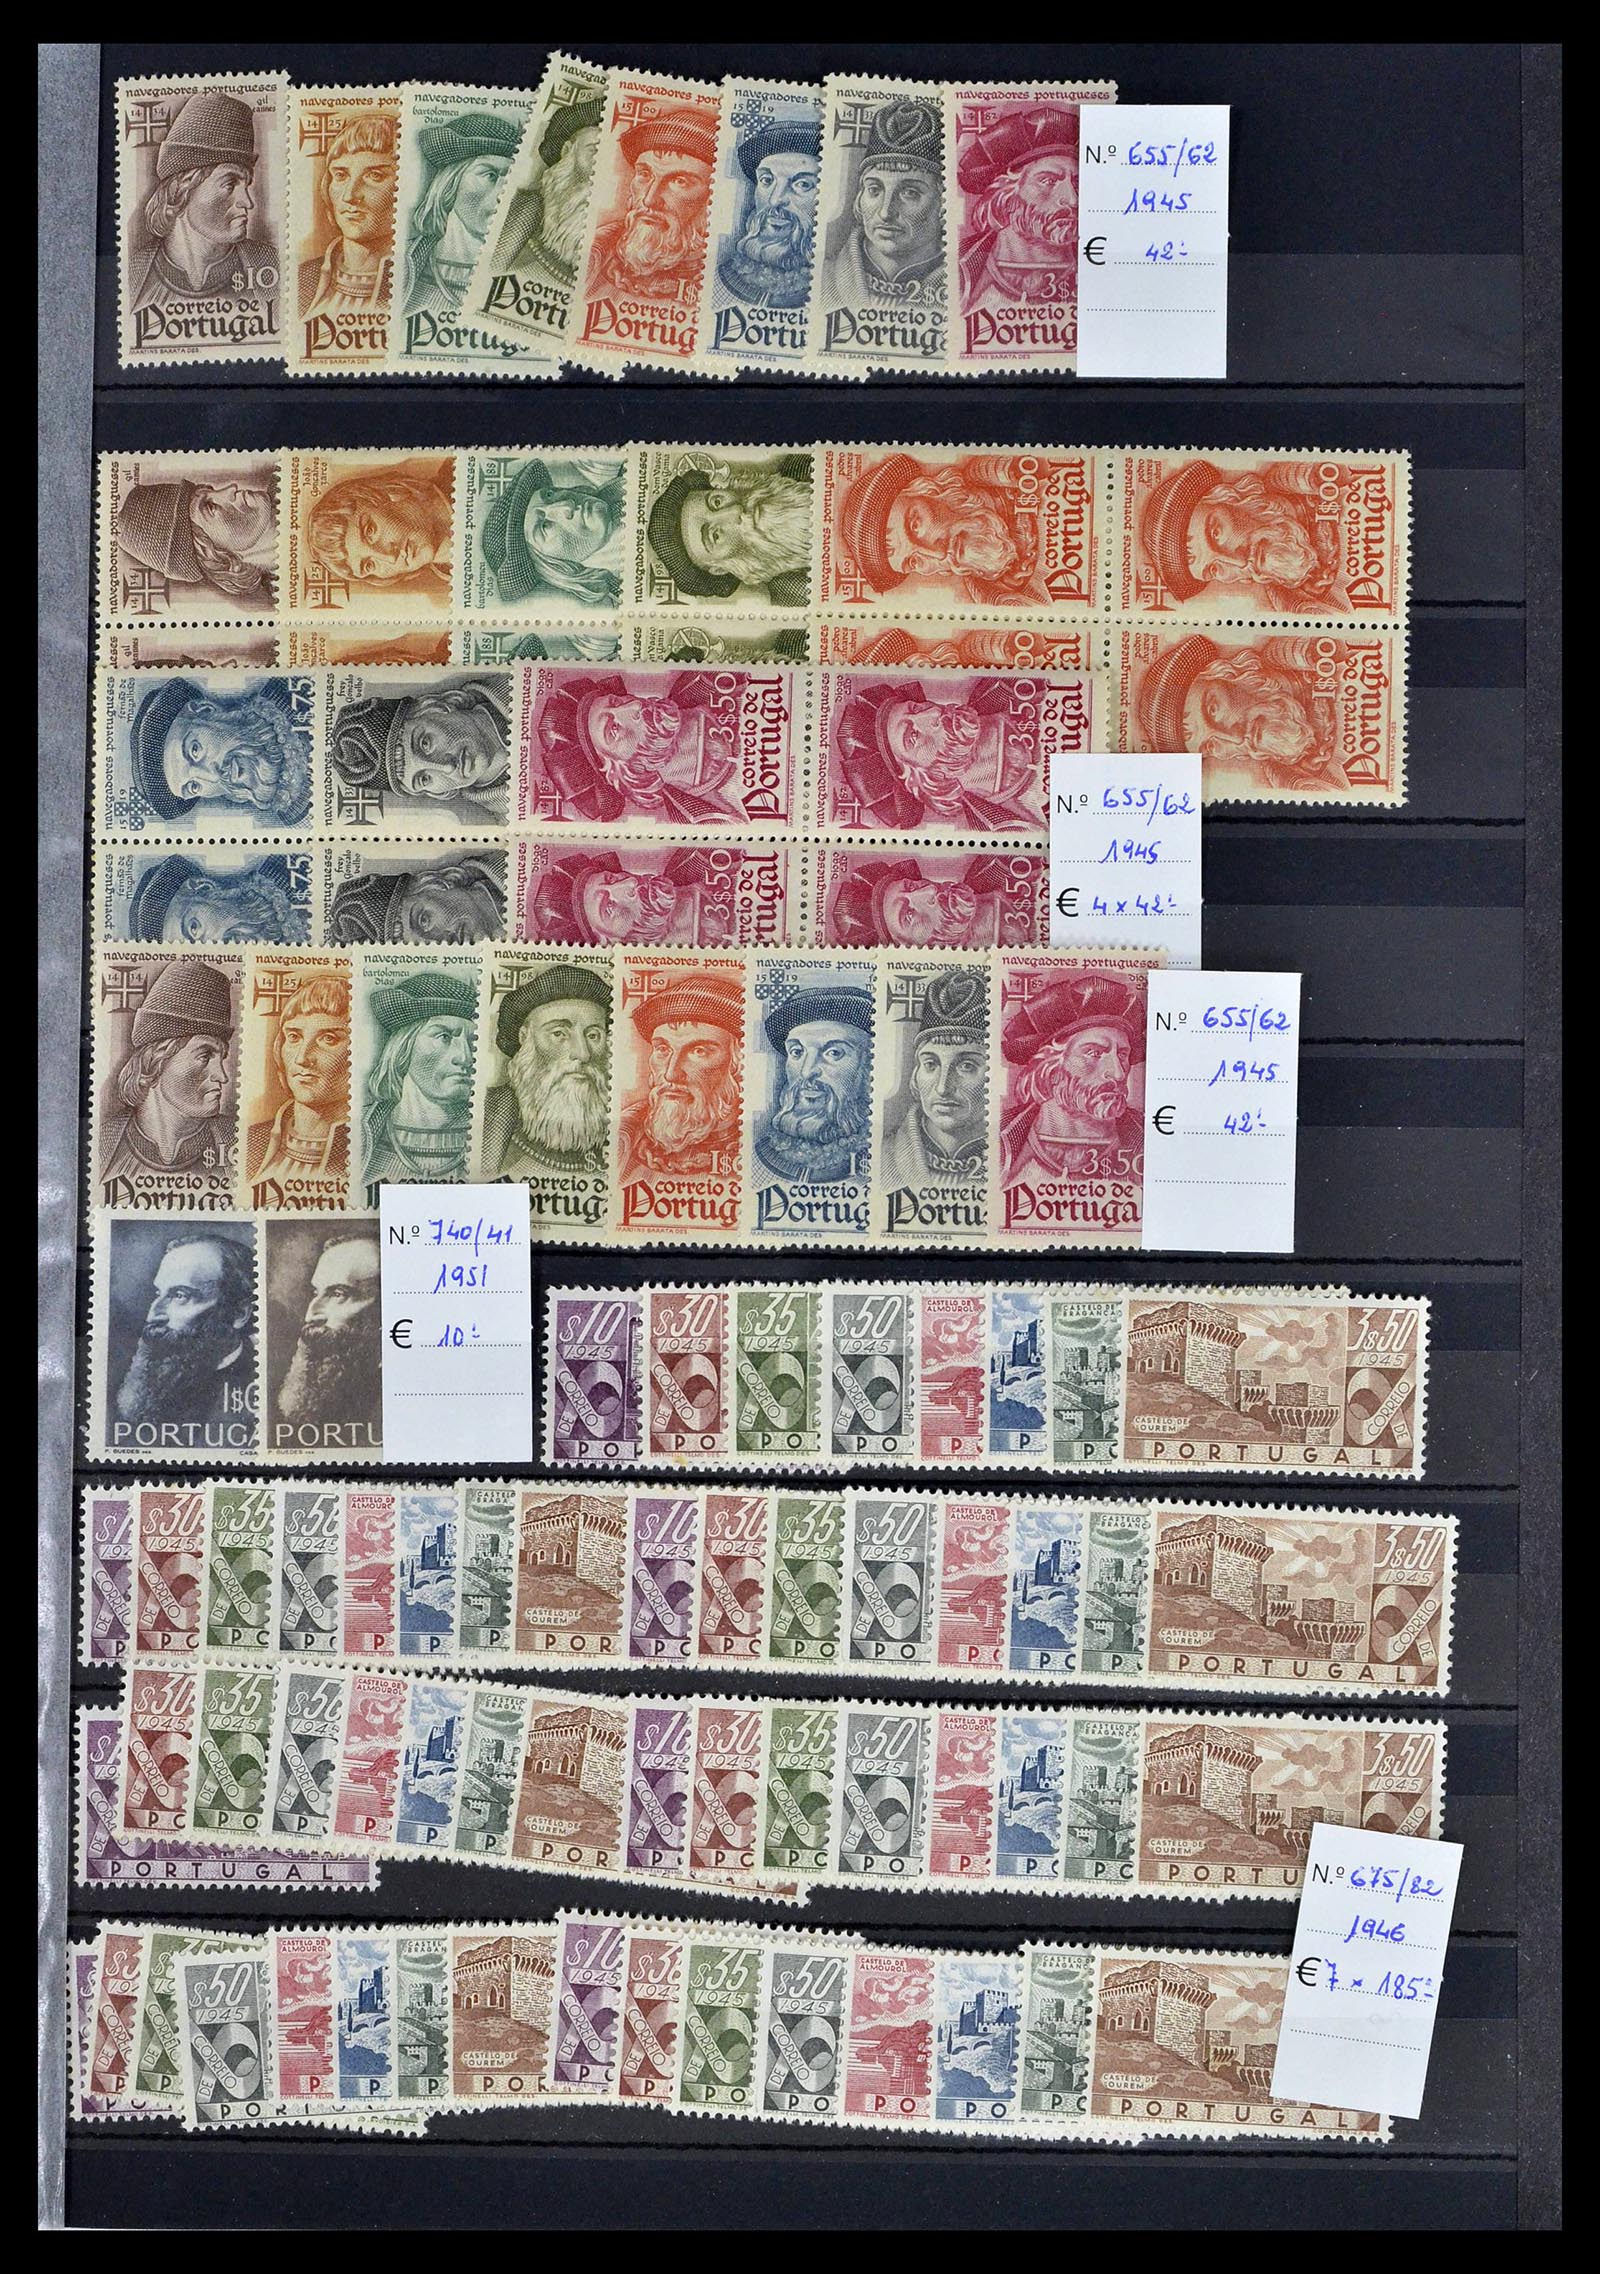 39236 0008 - Stamp collection 39236 European countries 40s-60s.